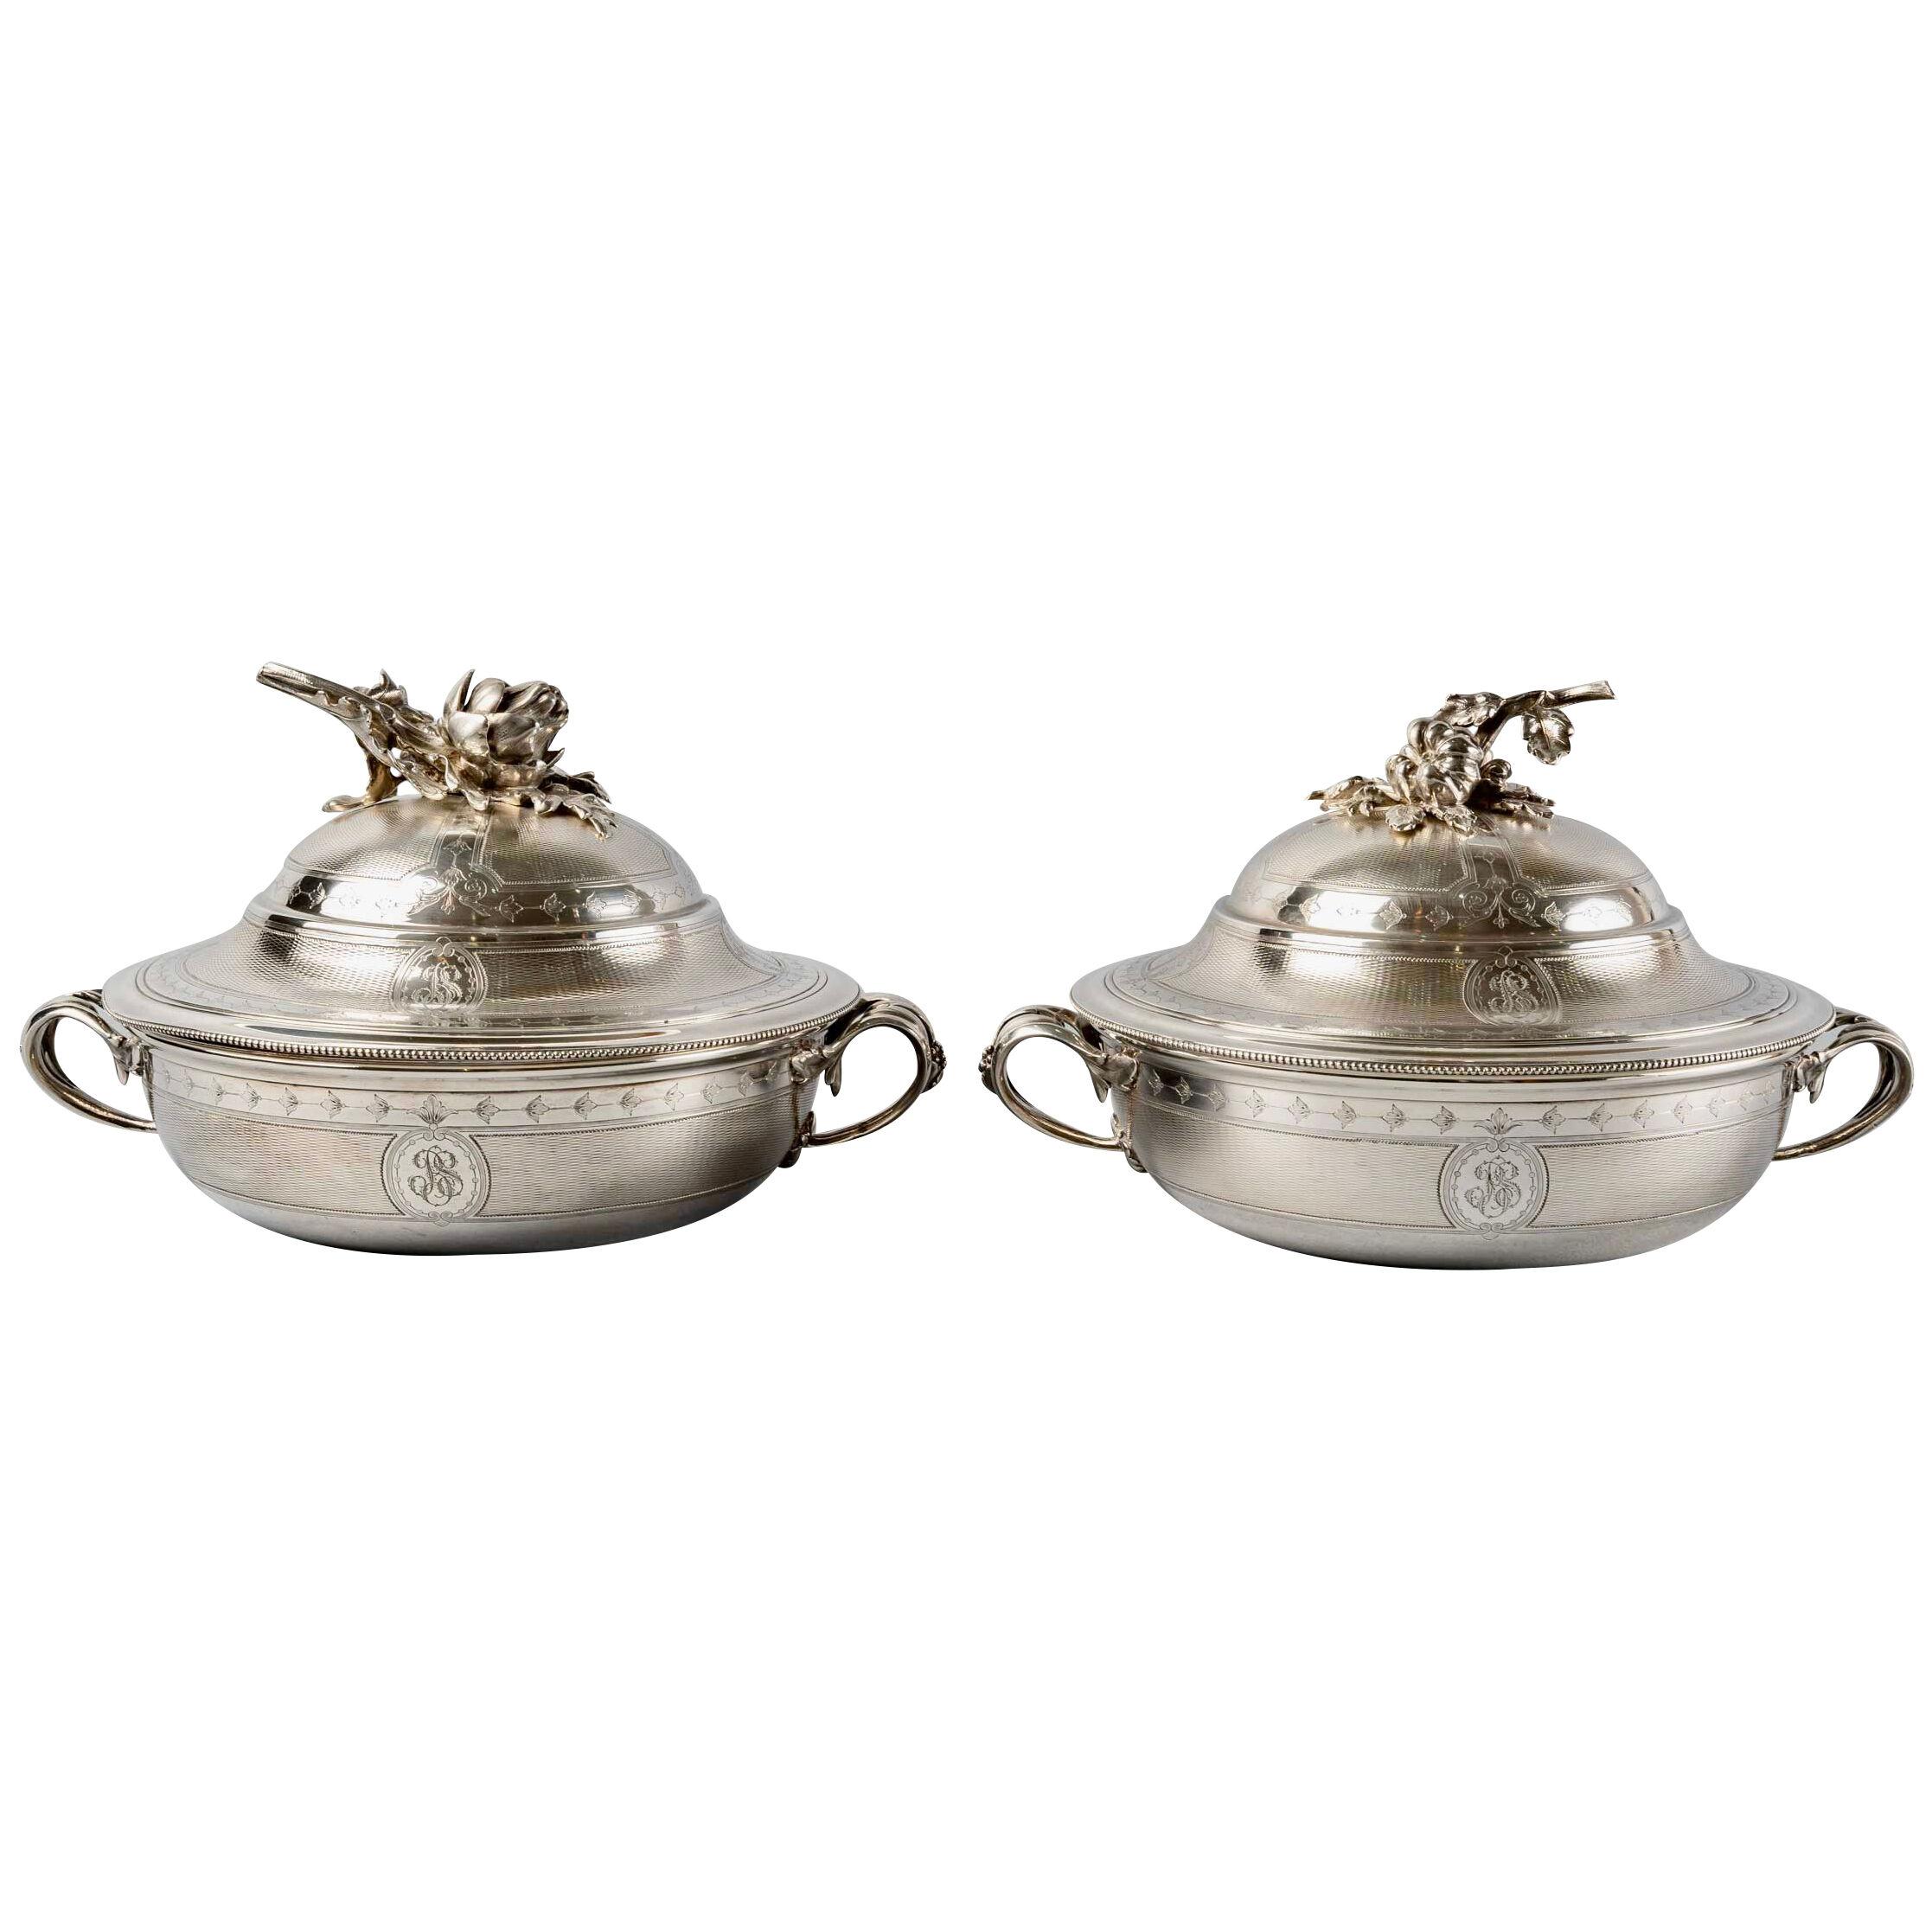 Christofle - Pair Of Tureens Guilloche Sterling Silver